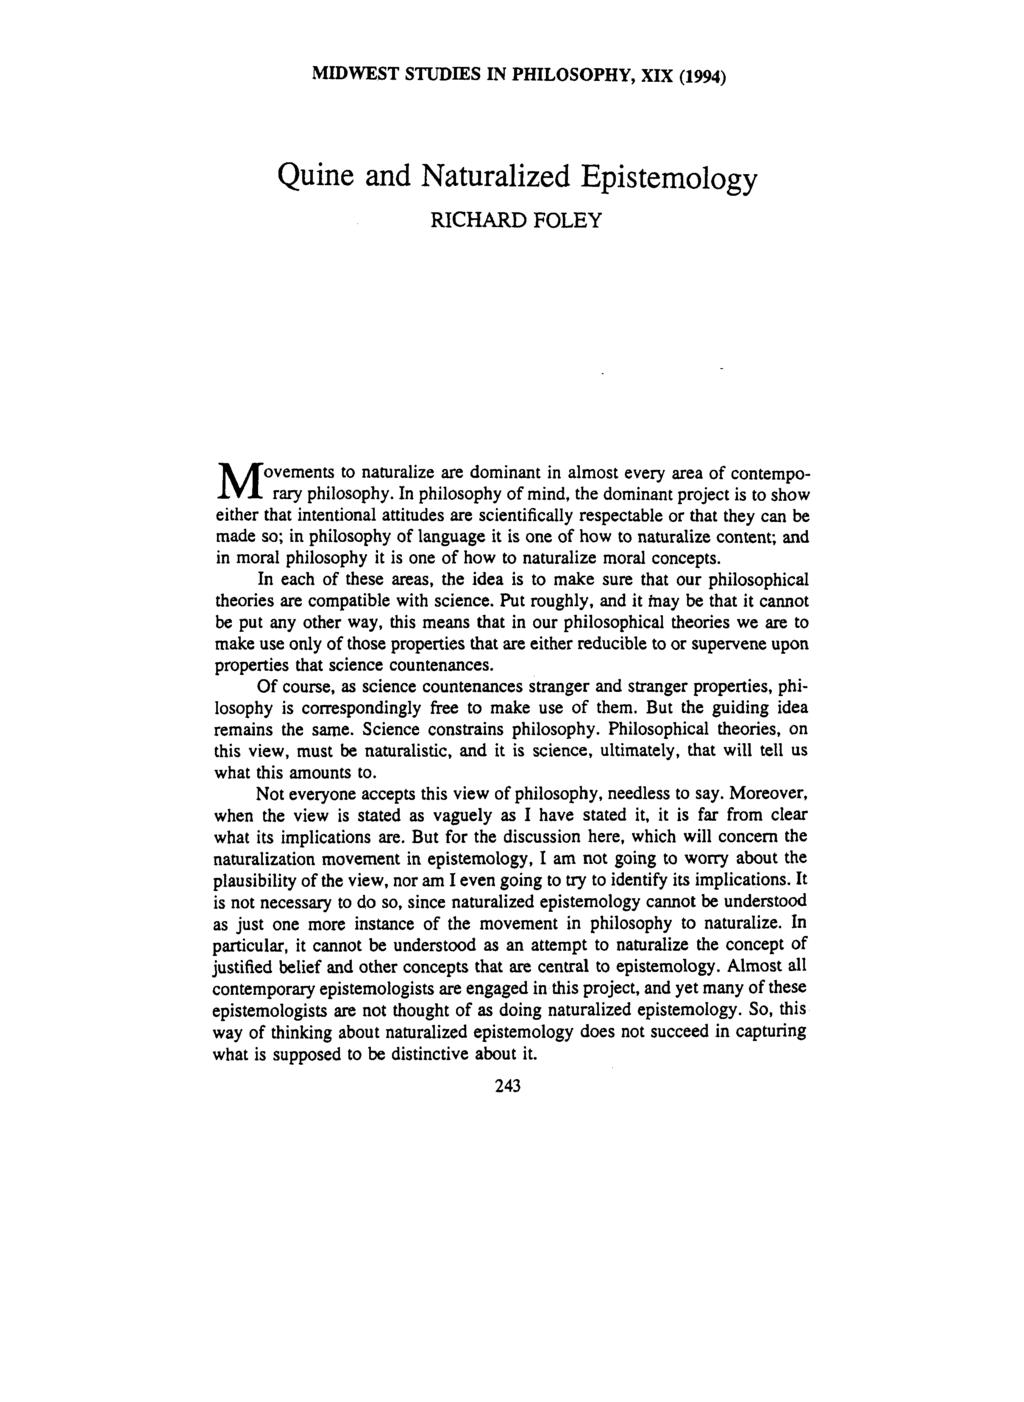 MIDWEST STUDIES IN PHILOSOPHY, XIX (1994) Quine and Naturalized Epistemology RICHARD FOLEY ovements to naturalize are dominant in almost every area of contempo- M rary philosophy.